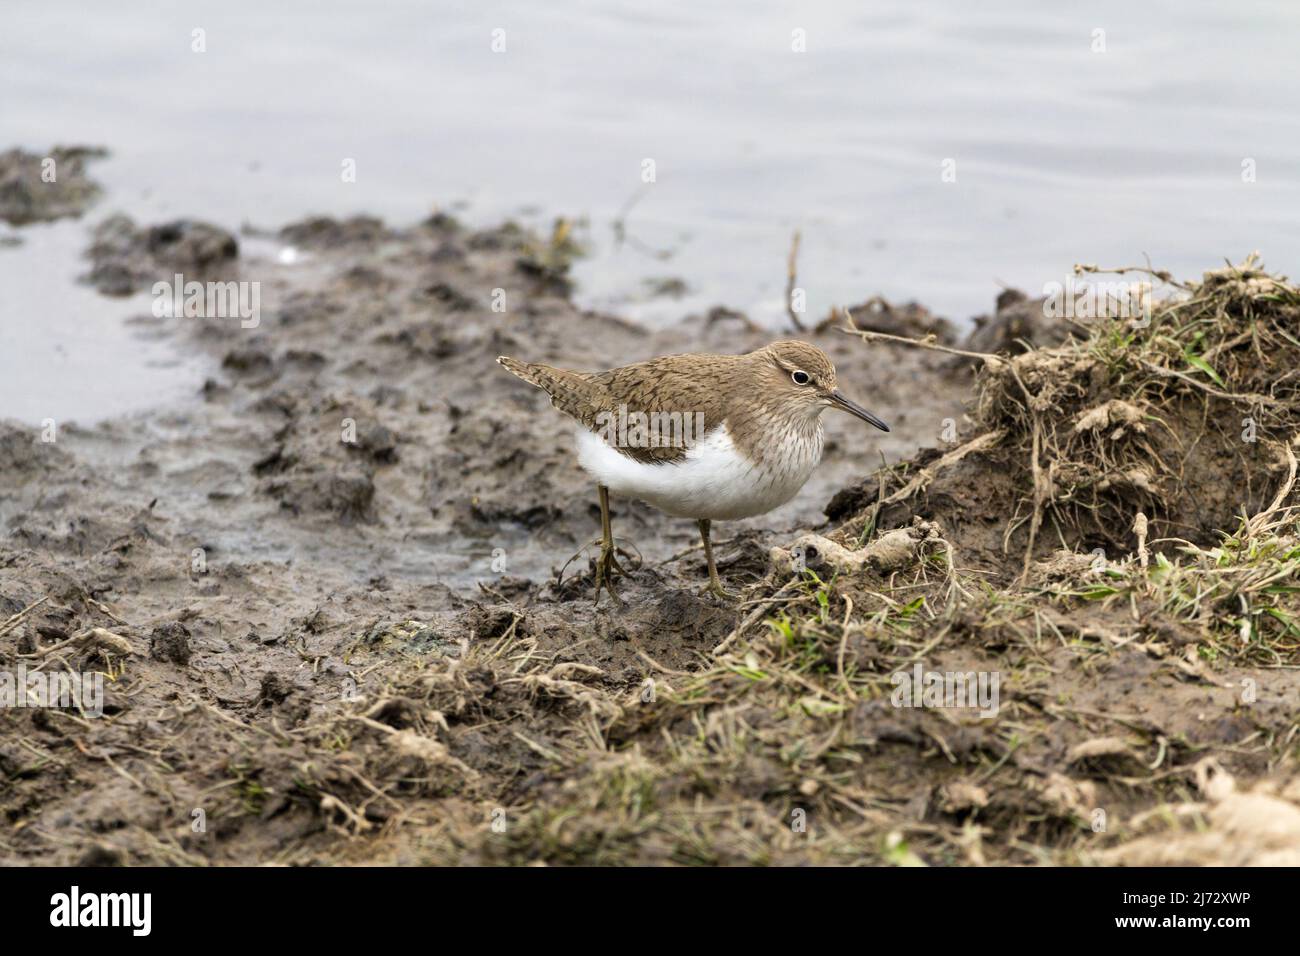 Sandpiper common (Actitis hypoleucos) small wading bird warm brown upperparts white underparts long tail horizontal stance bobs up and down lakeside Stock Photo